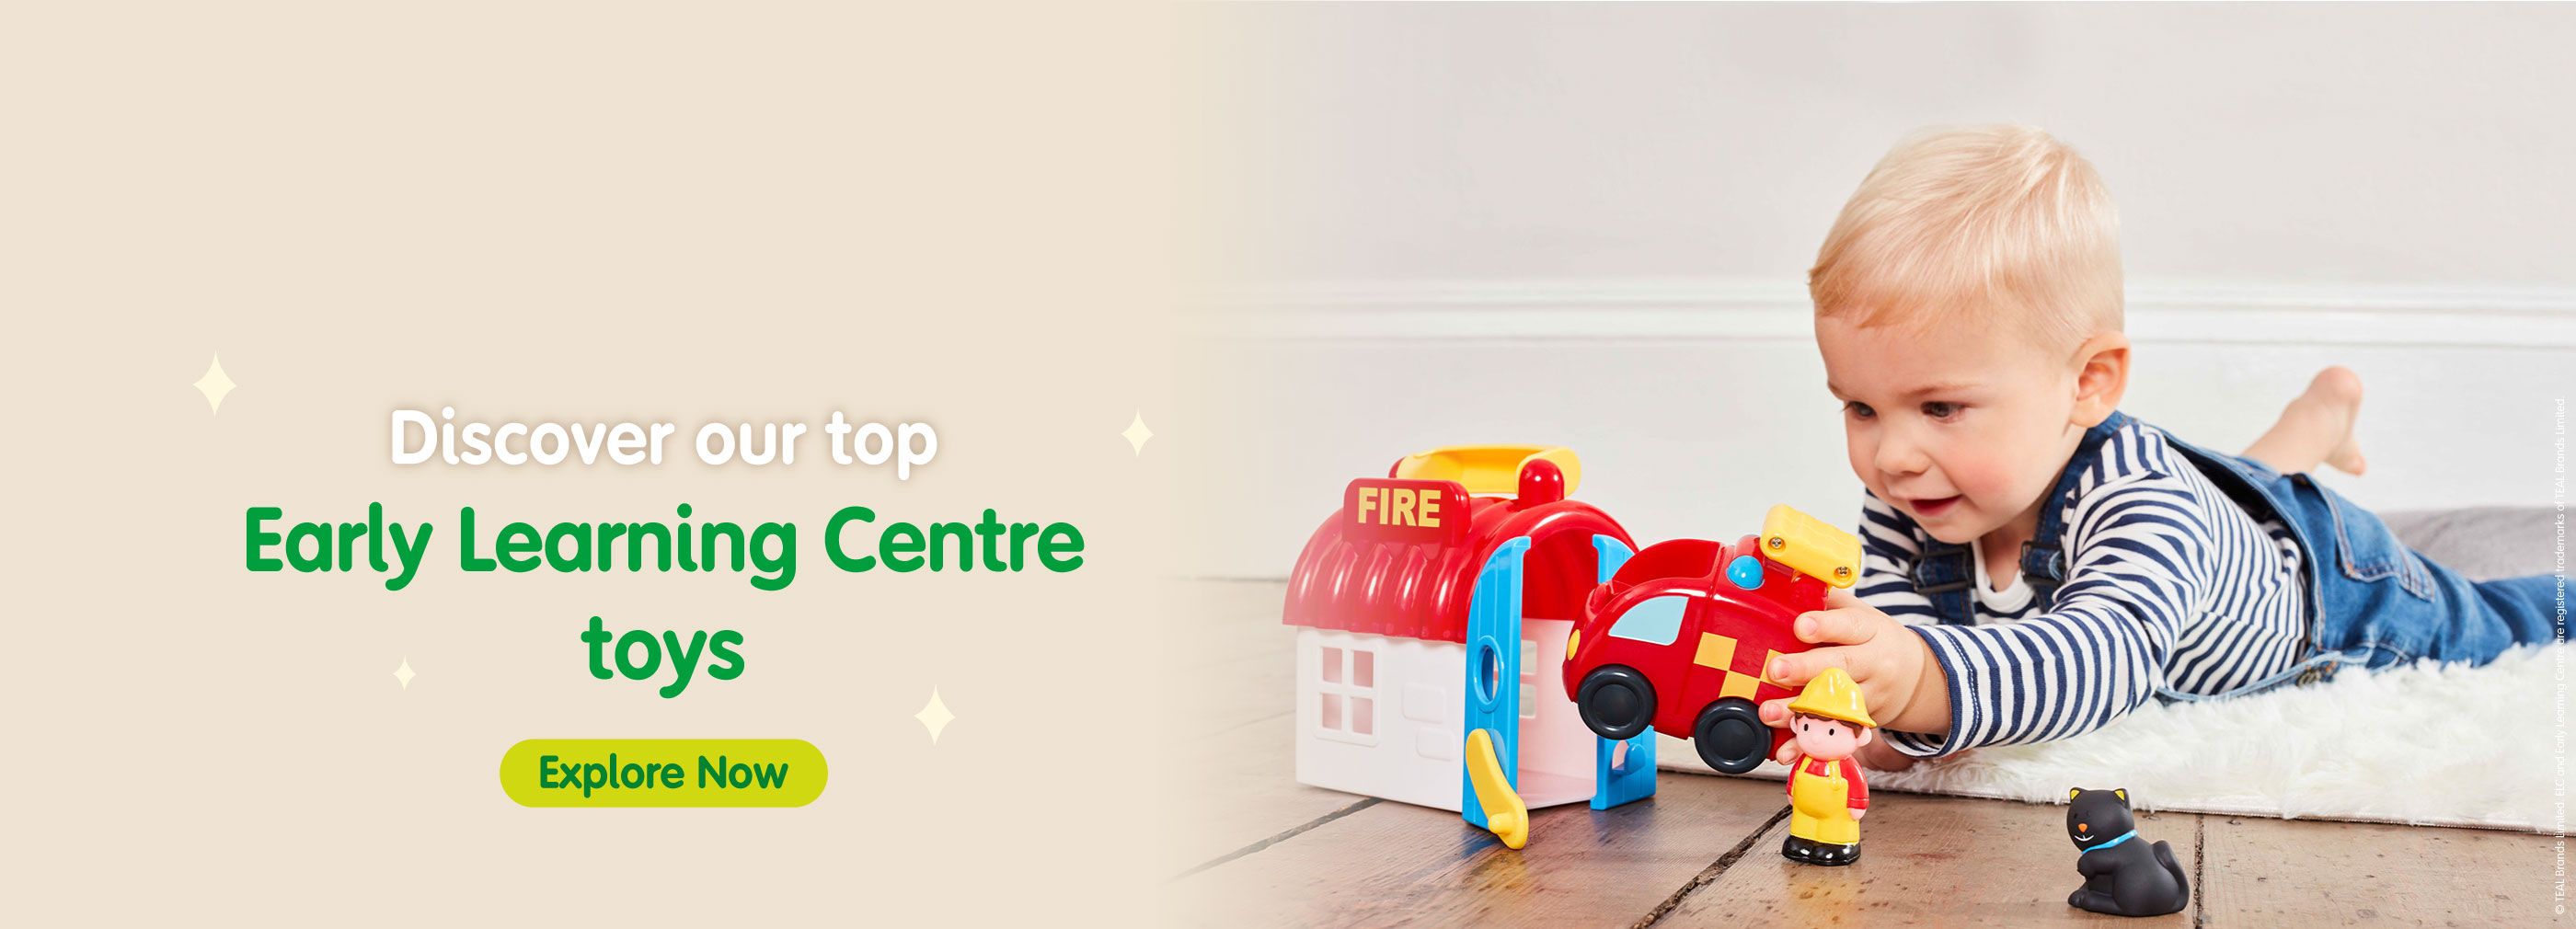 Discover Our Top Early Learning Centre Toys - Explore Now